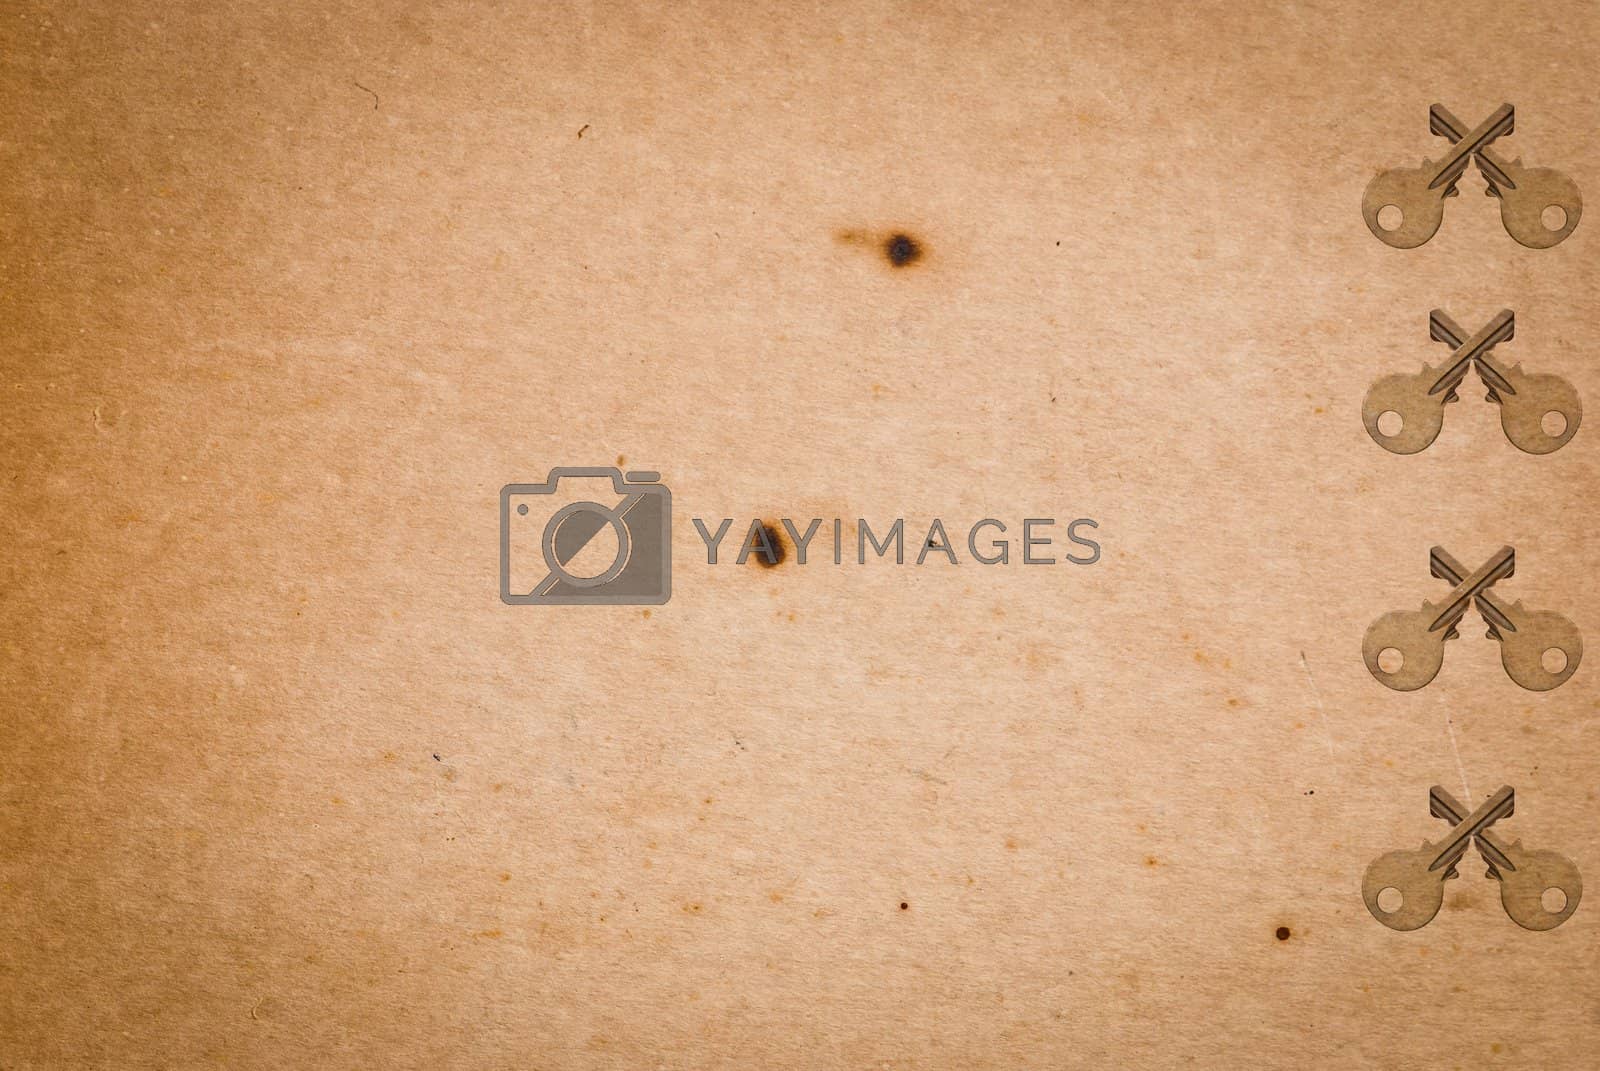 Royalty free image of Rusty keys on old paper background by sasilsolutions